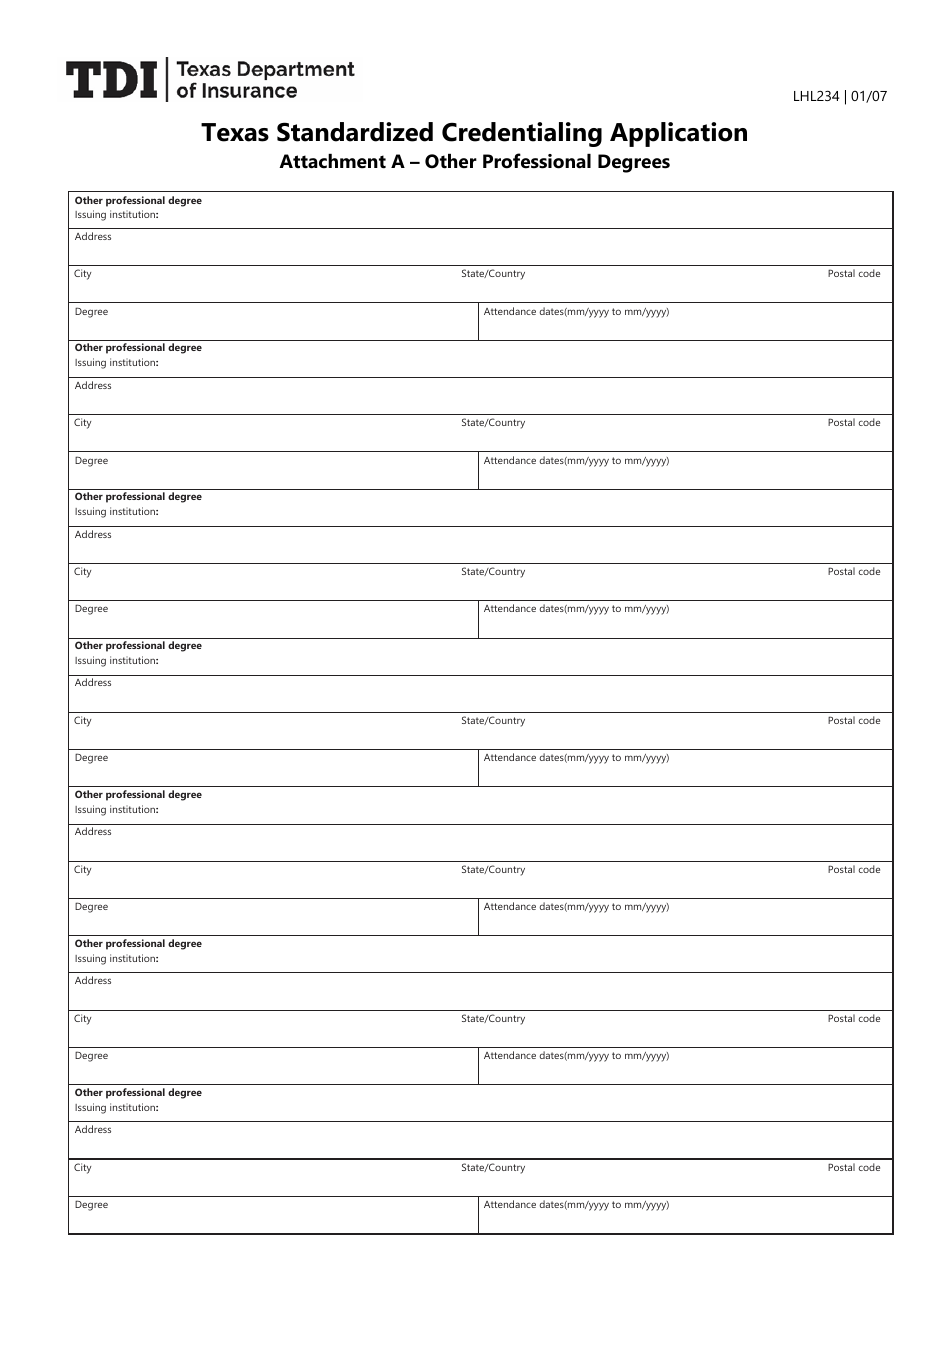 Form LHL234 Attachment A Texas Standardized Credentialing Application - Other Professional Degrees - Texas, Page 1